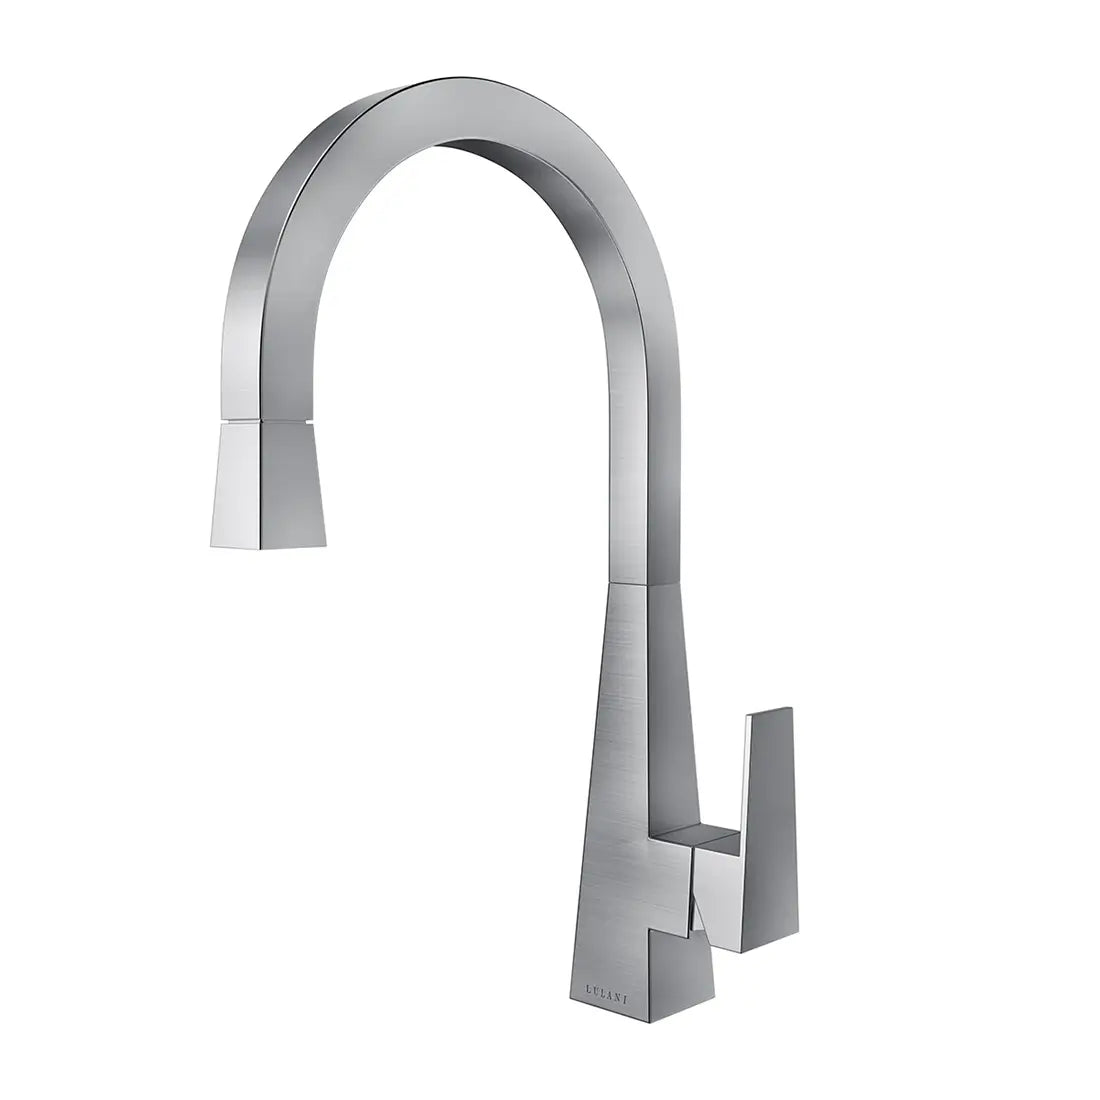 Santorini - Stainless Steel Pull-Down Kitchen Faucet